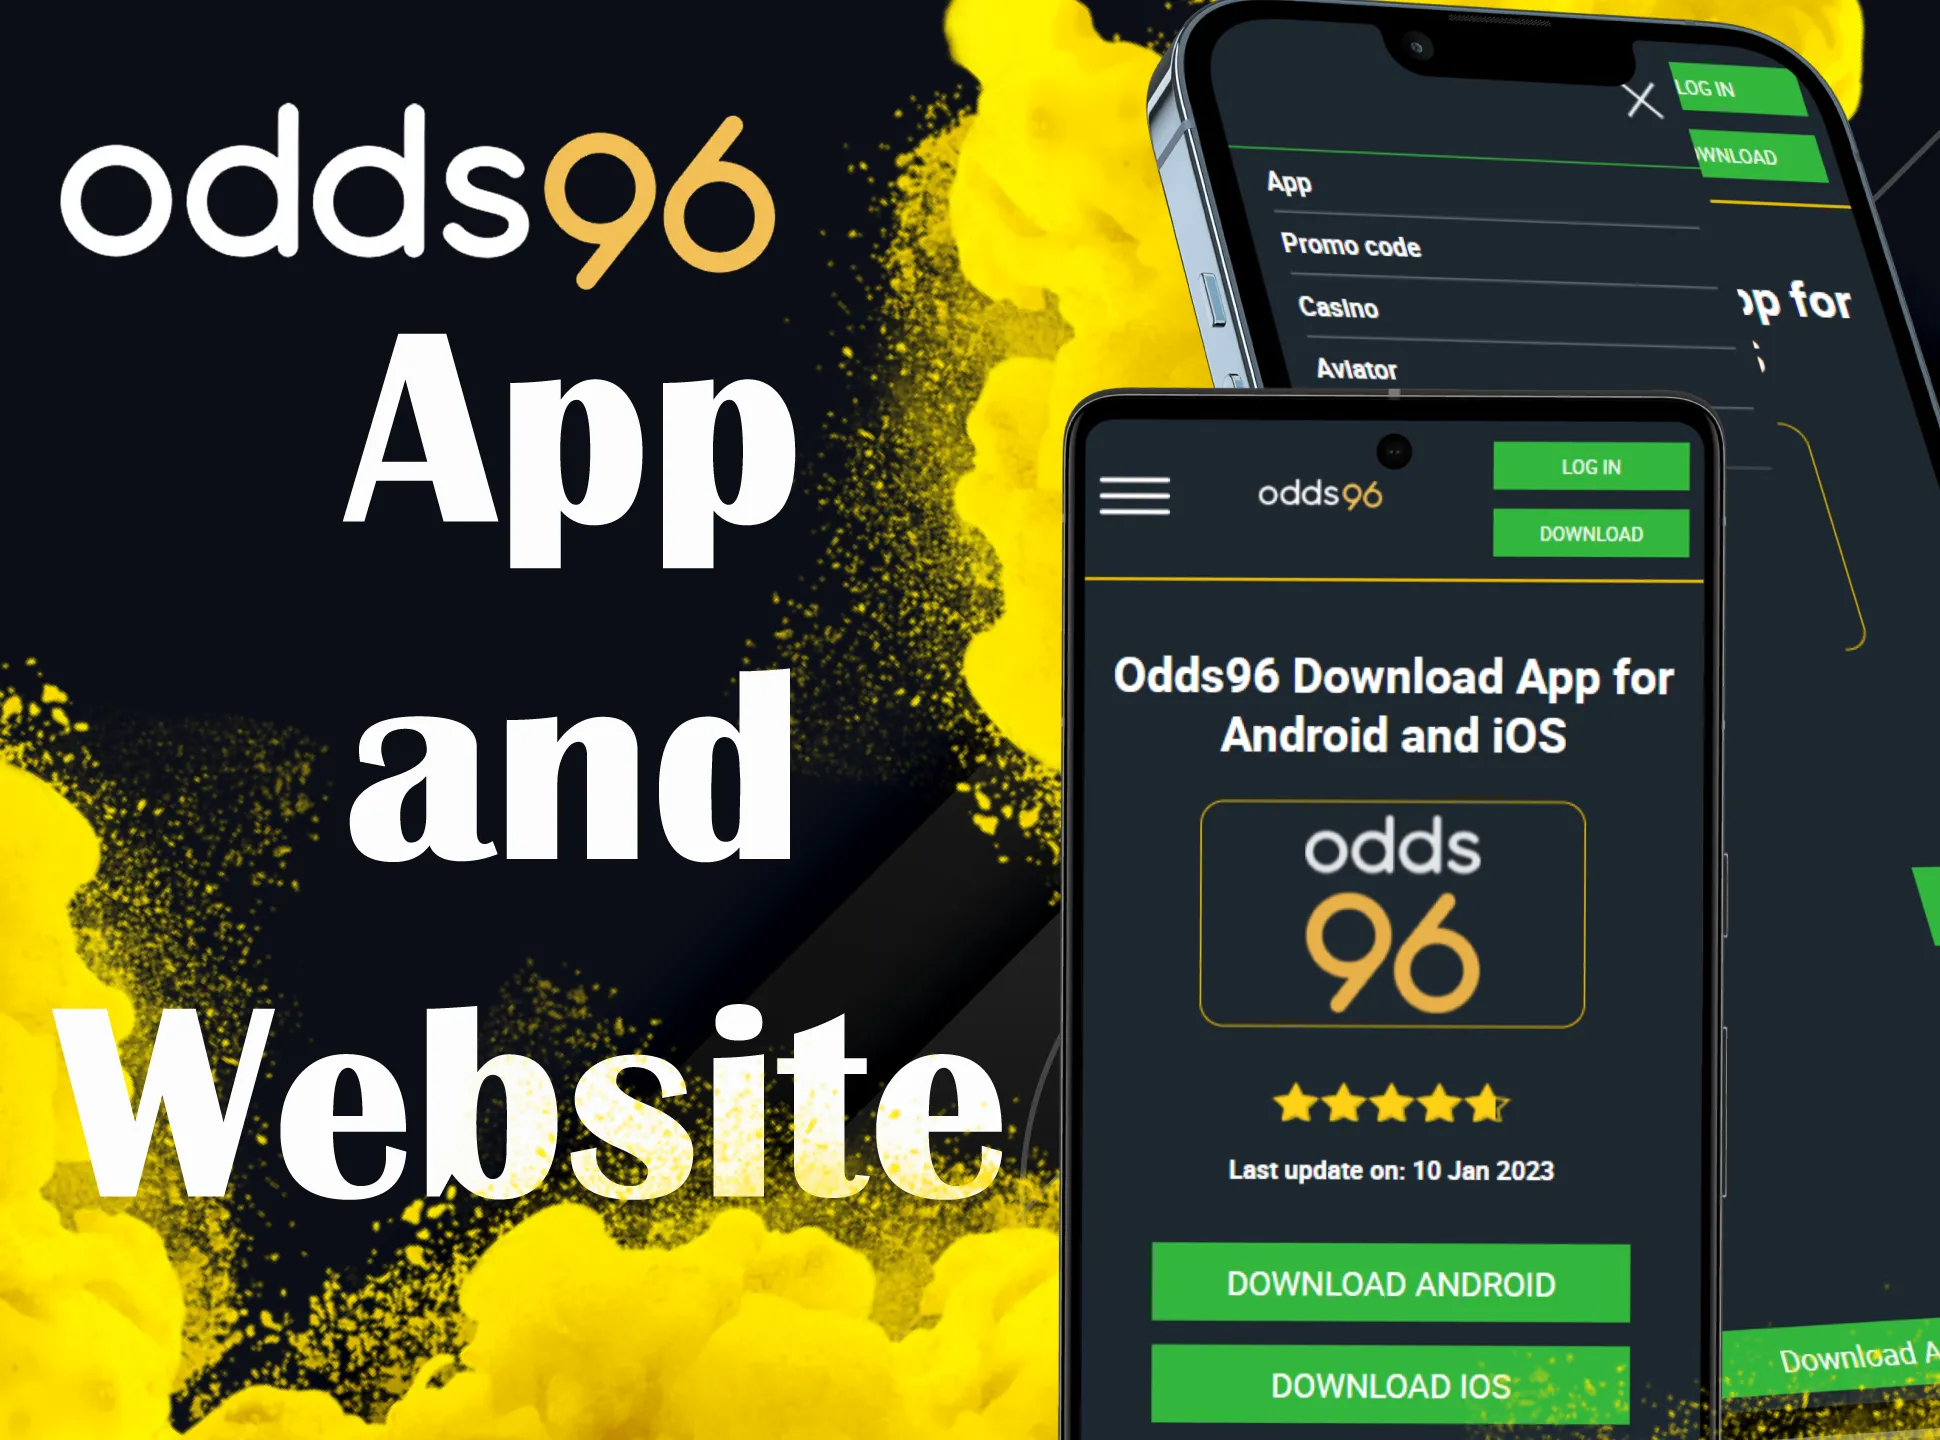 You can make bets using Odds96 app and website.